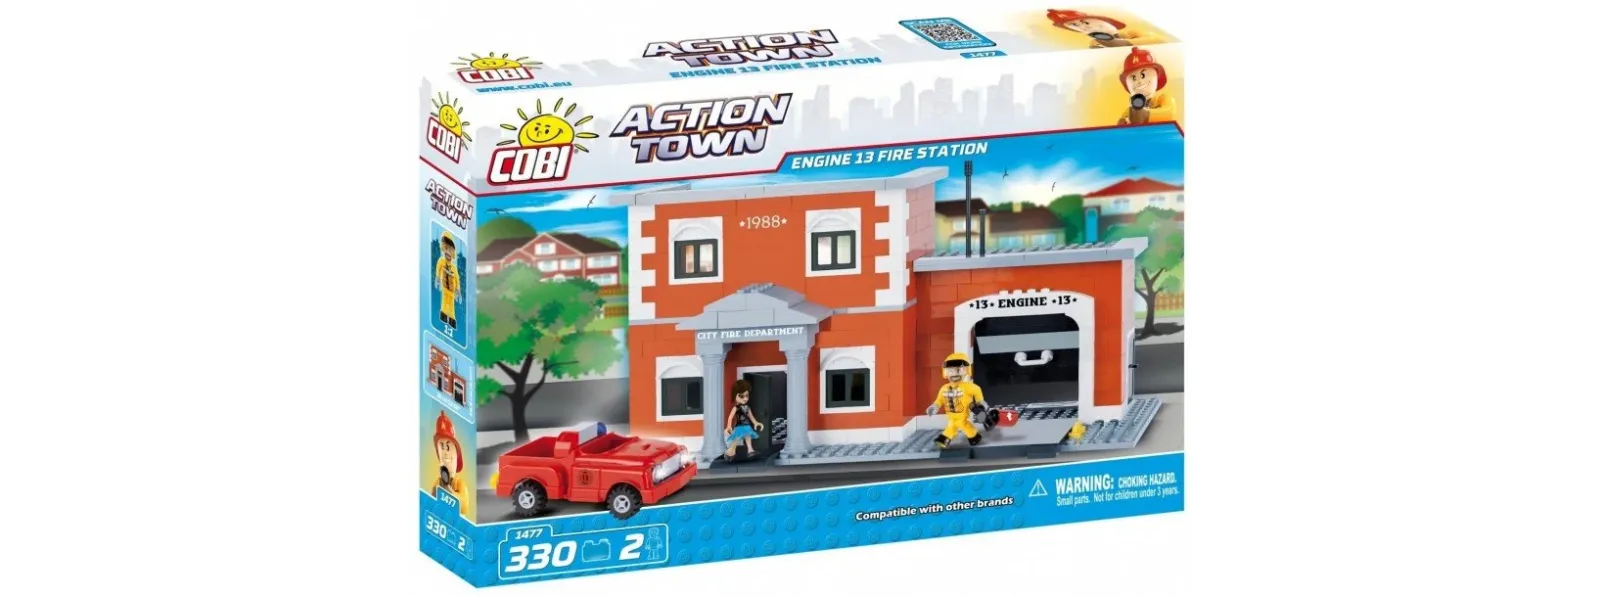 Promocja Action Town